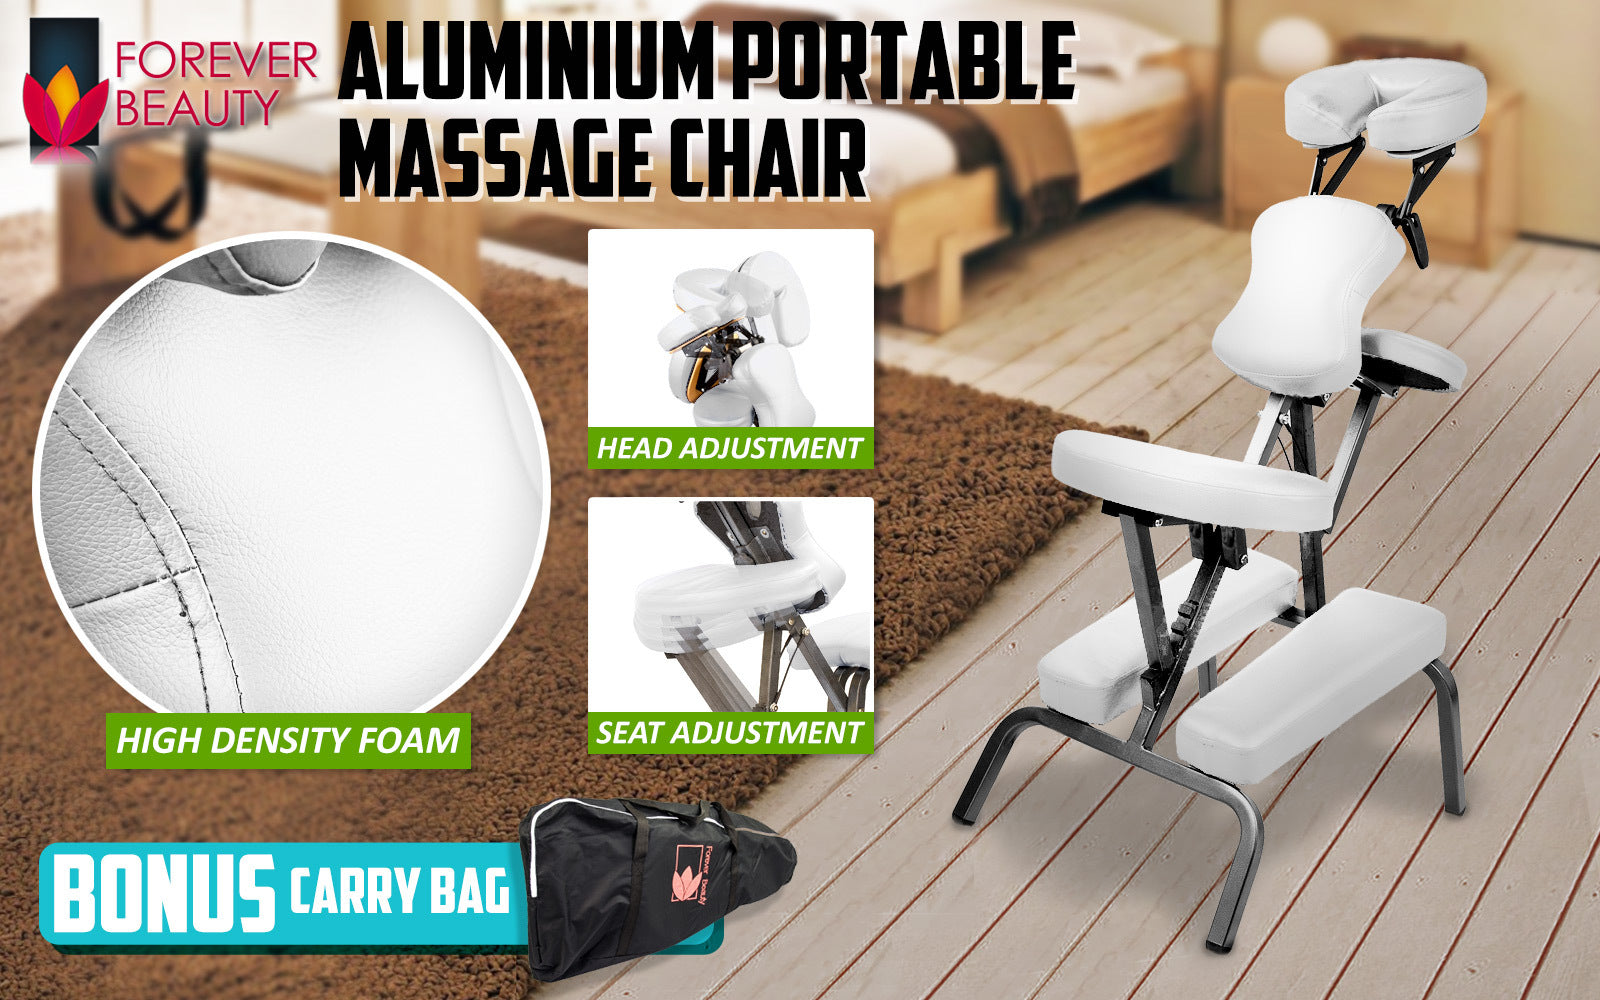 Forever Beauty White Portable Beauty Massage Foldable Chair Table Therapy Waxing Aluminium - SILBERSHELL